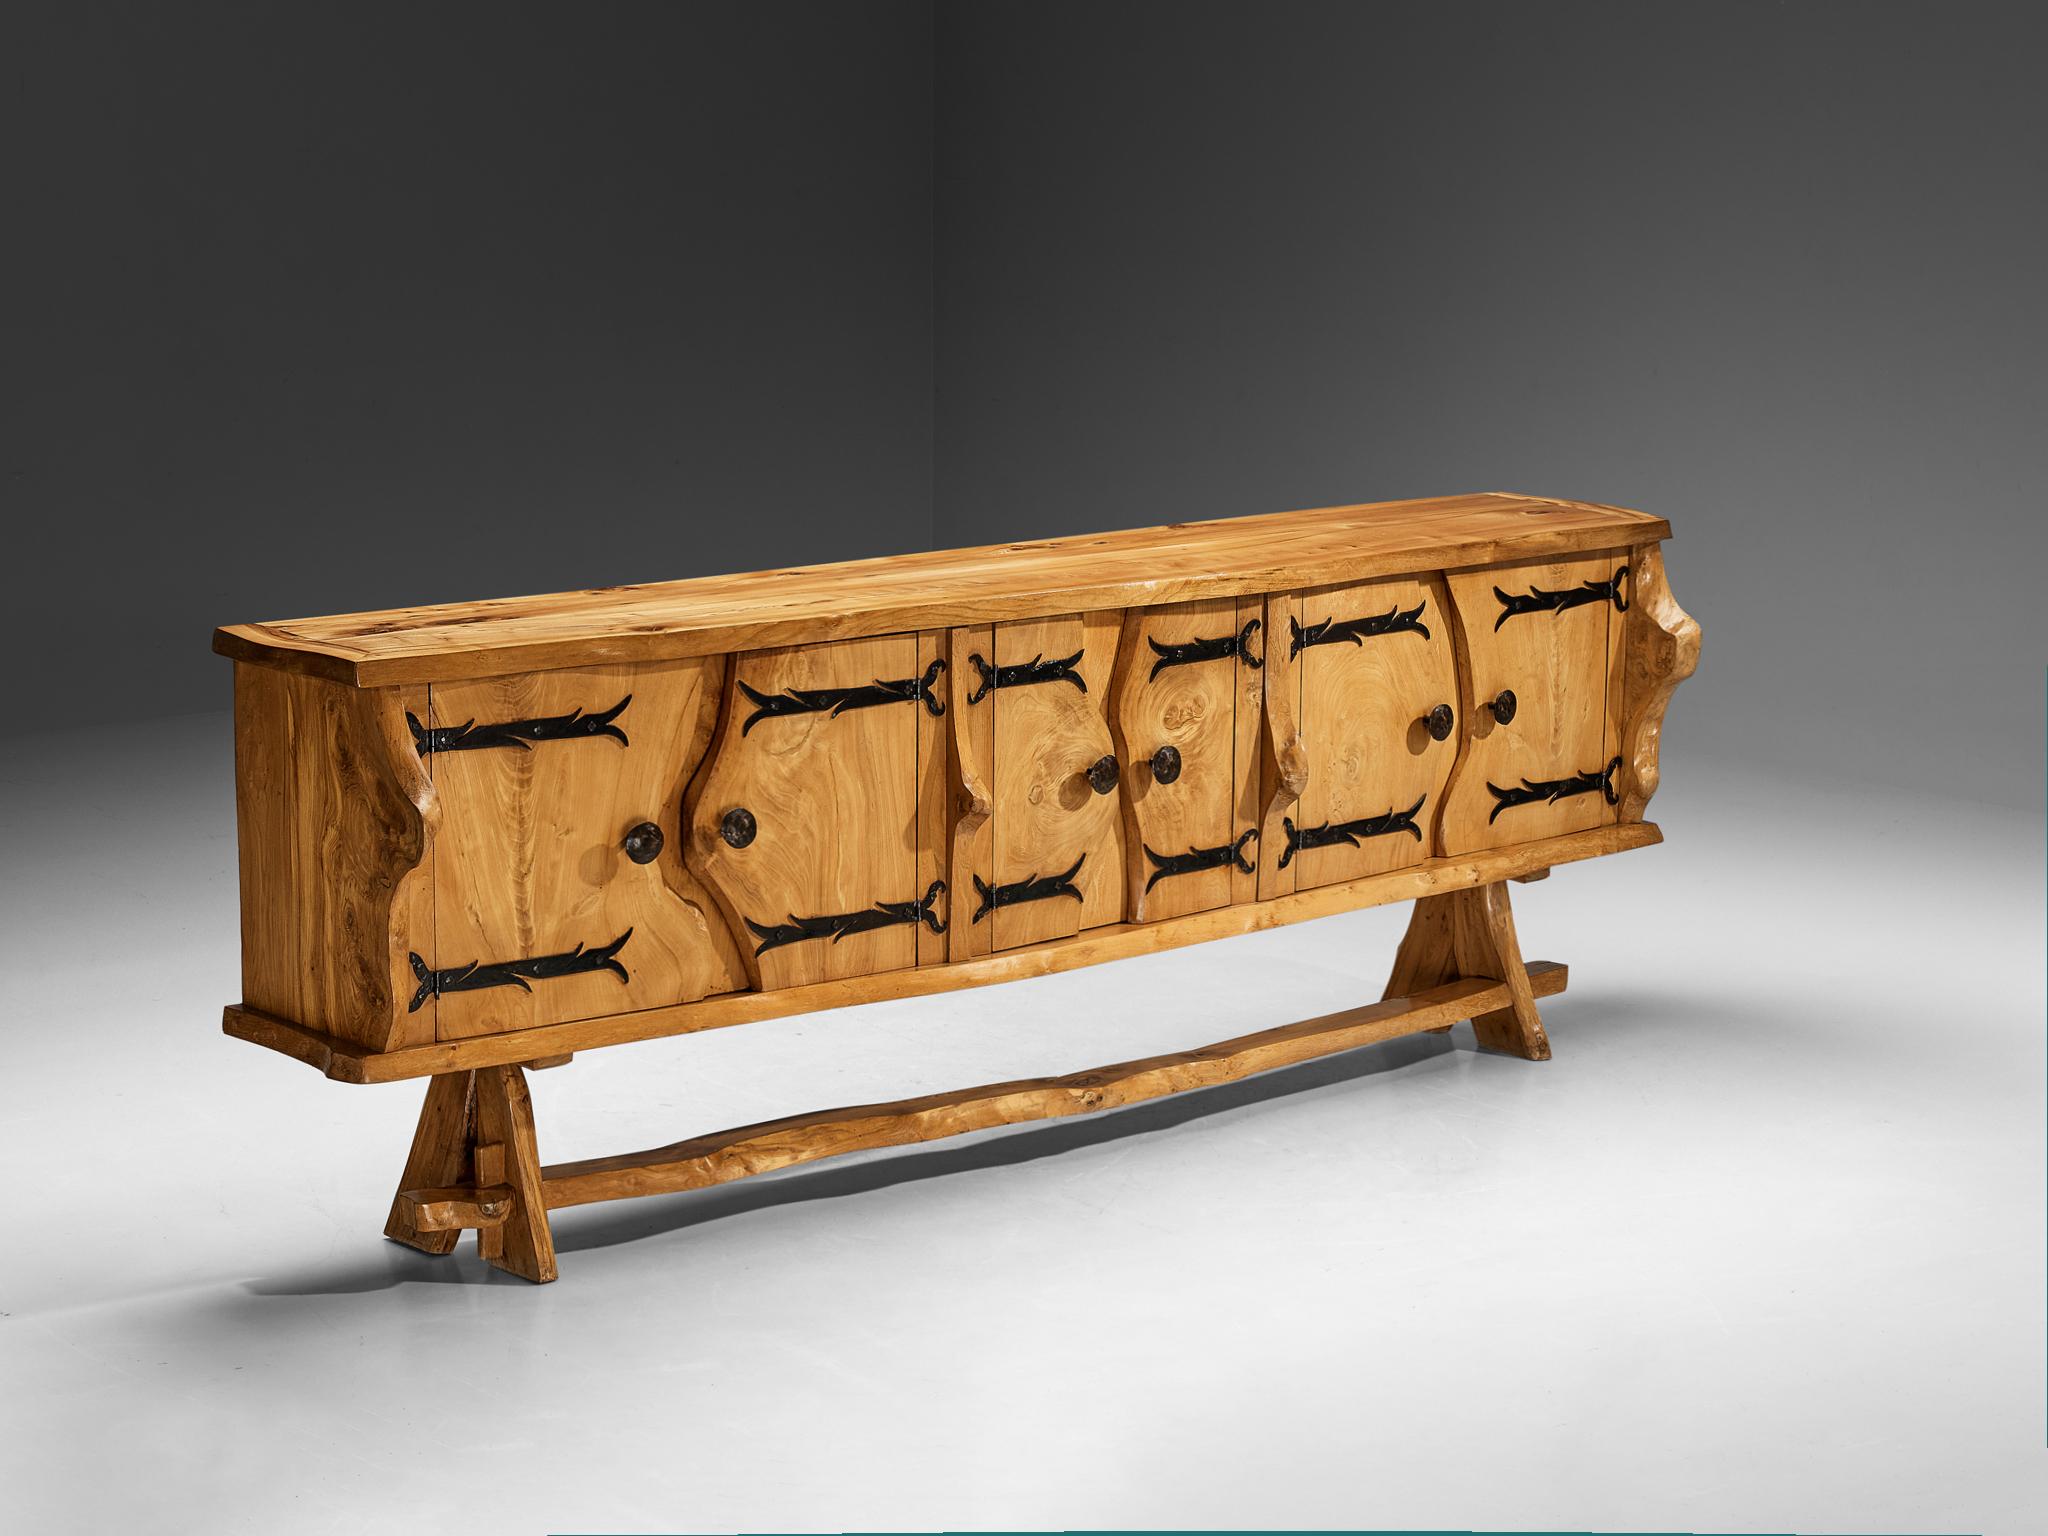 Charles Flandres, sideboard, solid elm, wrought iron, France, 1960s

The French cabinetmaker Charles Flandres has crafted this exquisite credenza, seamlessly combining rustic charm with organic elegance. The design features graceful, free-flowing